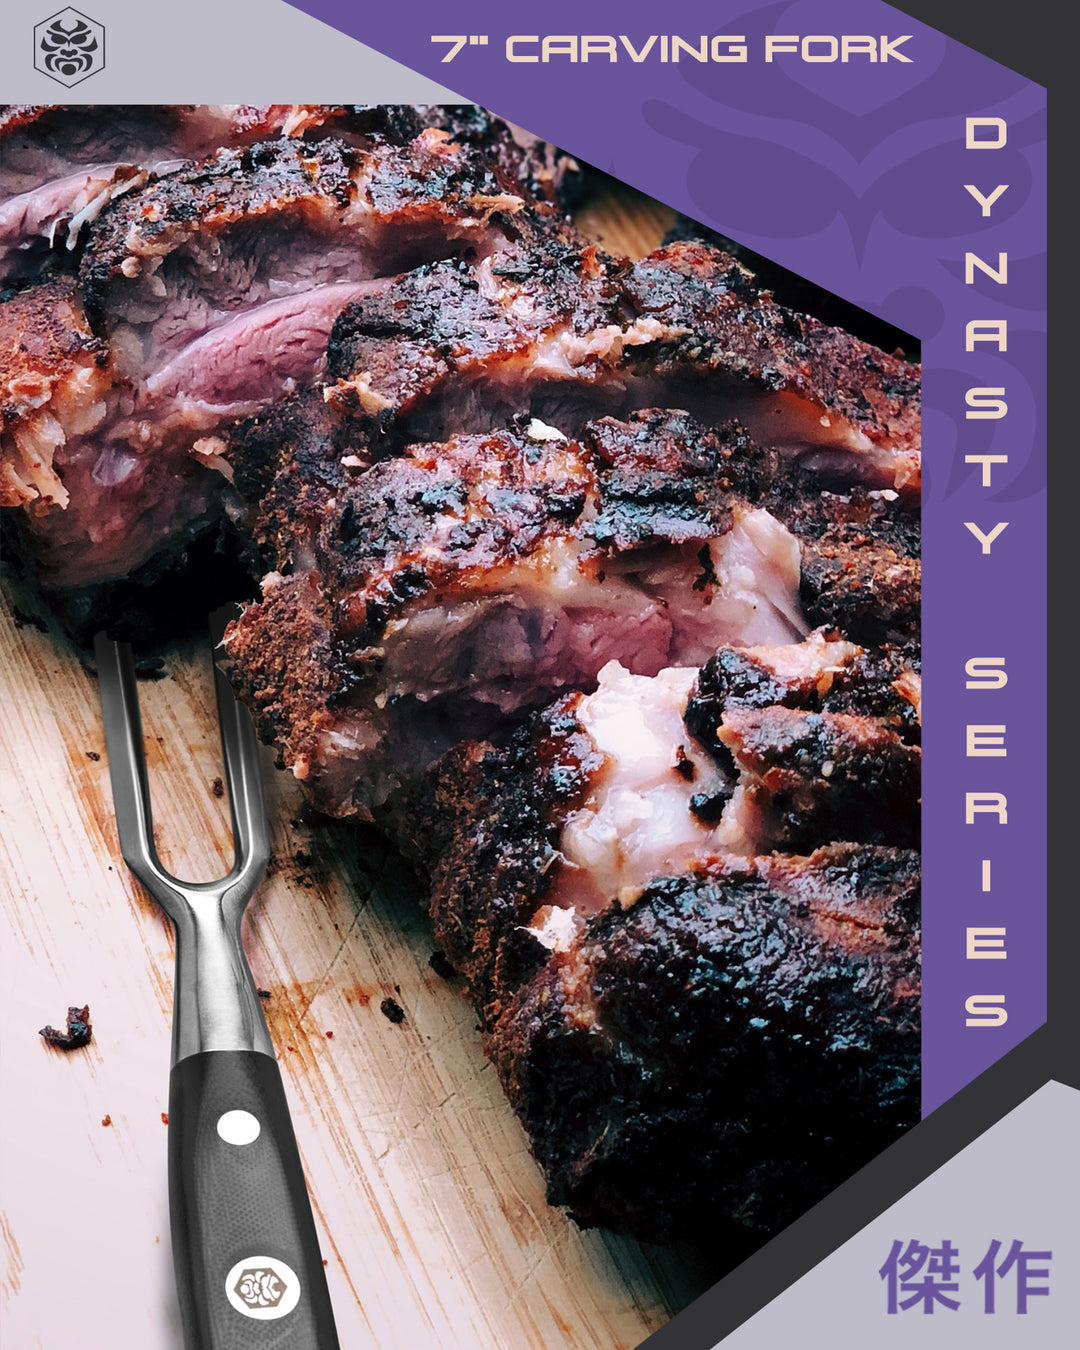 The Dynasty Carving Fork on a table with super thick slices of brisket.